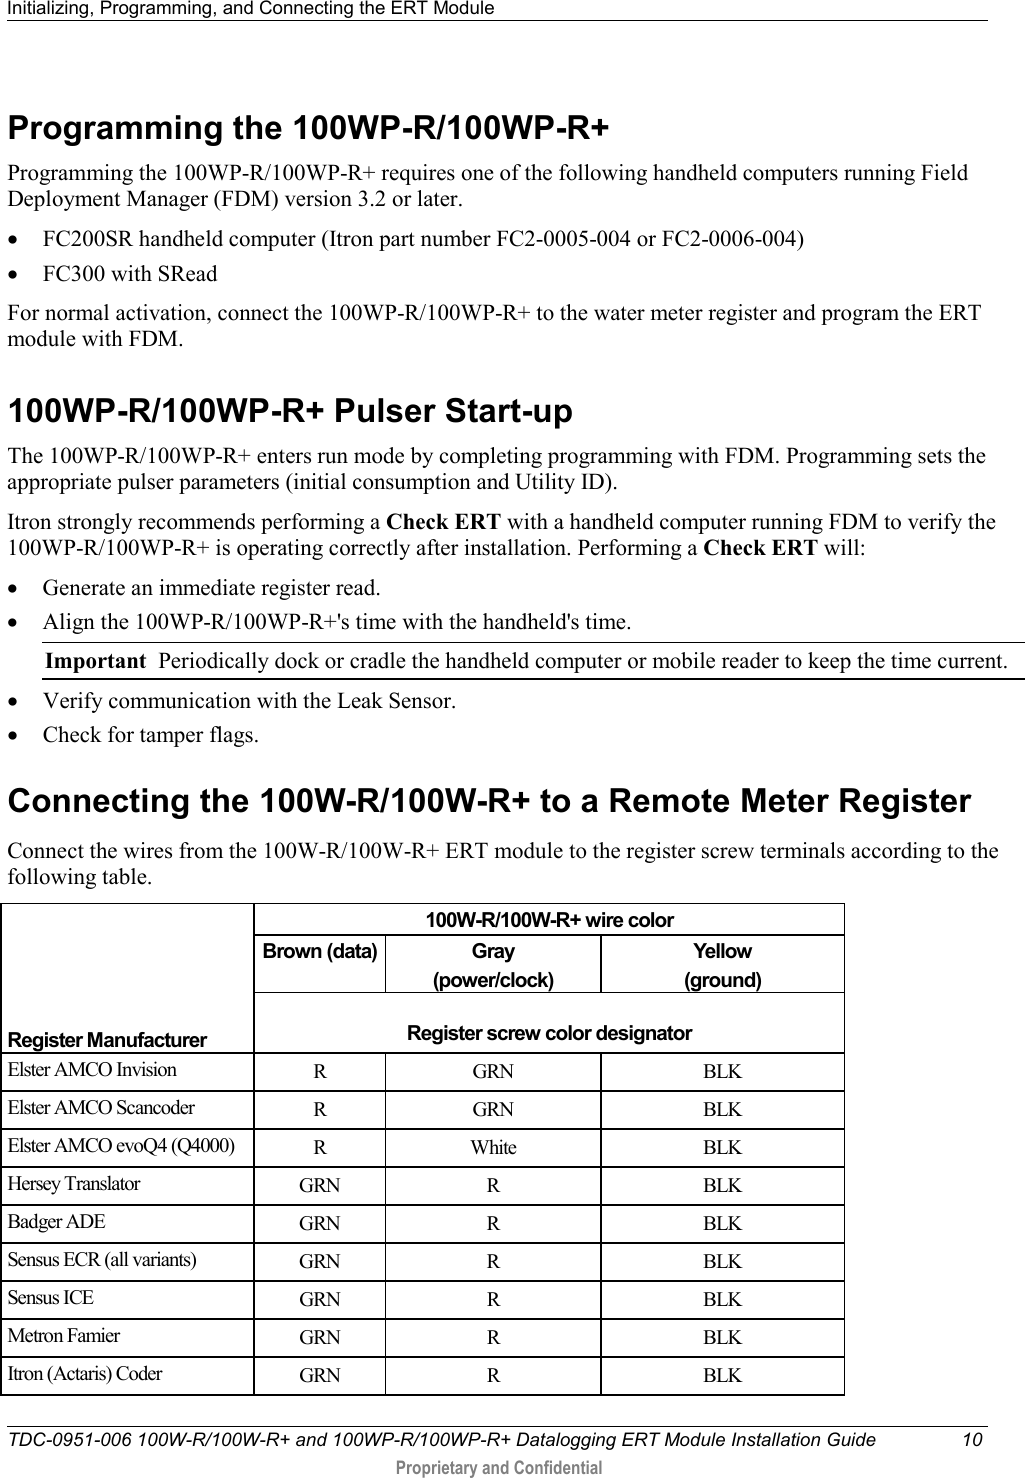 Initializing, Programming, and Connecting the ERT Module   TDC-0951-006 100W-R/100W-R+ and 100WP-R/100WP-R+ Datalogging ERT Module Installation Guide 10  Proprietary and Confidential    Programming the 100WP-R/100WP-R+ Programming the 100WP-R/100WP-R+ requires one of the following handheld computers running Field Deployment Manager (FDM) version 3.2 or later. • FC200SR handheld computer (Itron part number FC2-0005-004 or FC2-0006-004) • FC300 with SRead For normal activation, connect the 100WP-R/100WP-R+ to the water meter register and program the ERT module with FDM.   100WP-R/100WP-R+ Pulser Start-up The 100WP-R/100WP-R+ enters run mode by completing programming with FDM. Programming sets the appropriate pulser parameters (initial consumption and Utility ID). Itron strongly recommends performing a Check ERT with a handheld computer running FDM to verify the 100WP-R/100WP-R+ is operating correctly after installation. Performing a Check ERT will: • Generate an immediate register read. • Align the 100WP-R/100WP-R+&apos;s time with the handheld&apos;s time. Important  Periodically dock or cradle the handheld computer or mobile reader to keep the time current. • Verify communication with the Leak Sensor. • Check for tamper flags.  Connecting the 100W-R/100W-R+ to a Remote Meter Register   Connect the wires from the 100W-R/100W-R+ ERT module to the register screw terminals according to the following table.      Register Manufacturer 100W-R/100W-R+ wire color Brown (data) Gray  (power/clock) Yellow (ground)  Register screw color designator Elster AMCO Invision R  GRN BLK Elster AMCO Scancoder R  GRN BLK Elster AMCO evoQ4 (Q4000) R  White BLK Hersey Translator GRN  R  BLK Badger ADE GRN  R  BLK Sensus ECR (all variants) GRN  R  BLK Sensus ICE GRN  R  BLK Metron Famier GRN  R  BLK Itron (Actaris) Coder GRN  R  BLK 